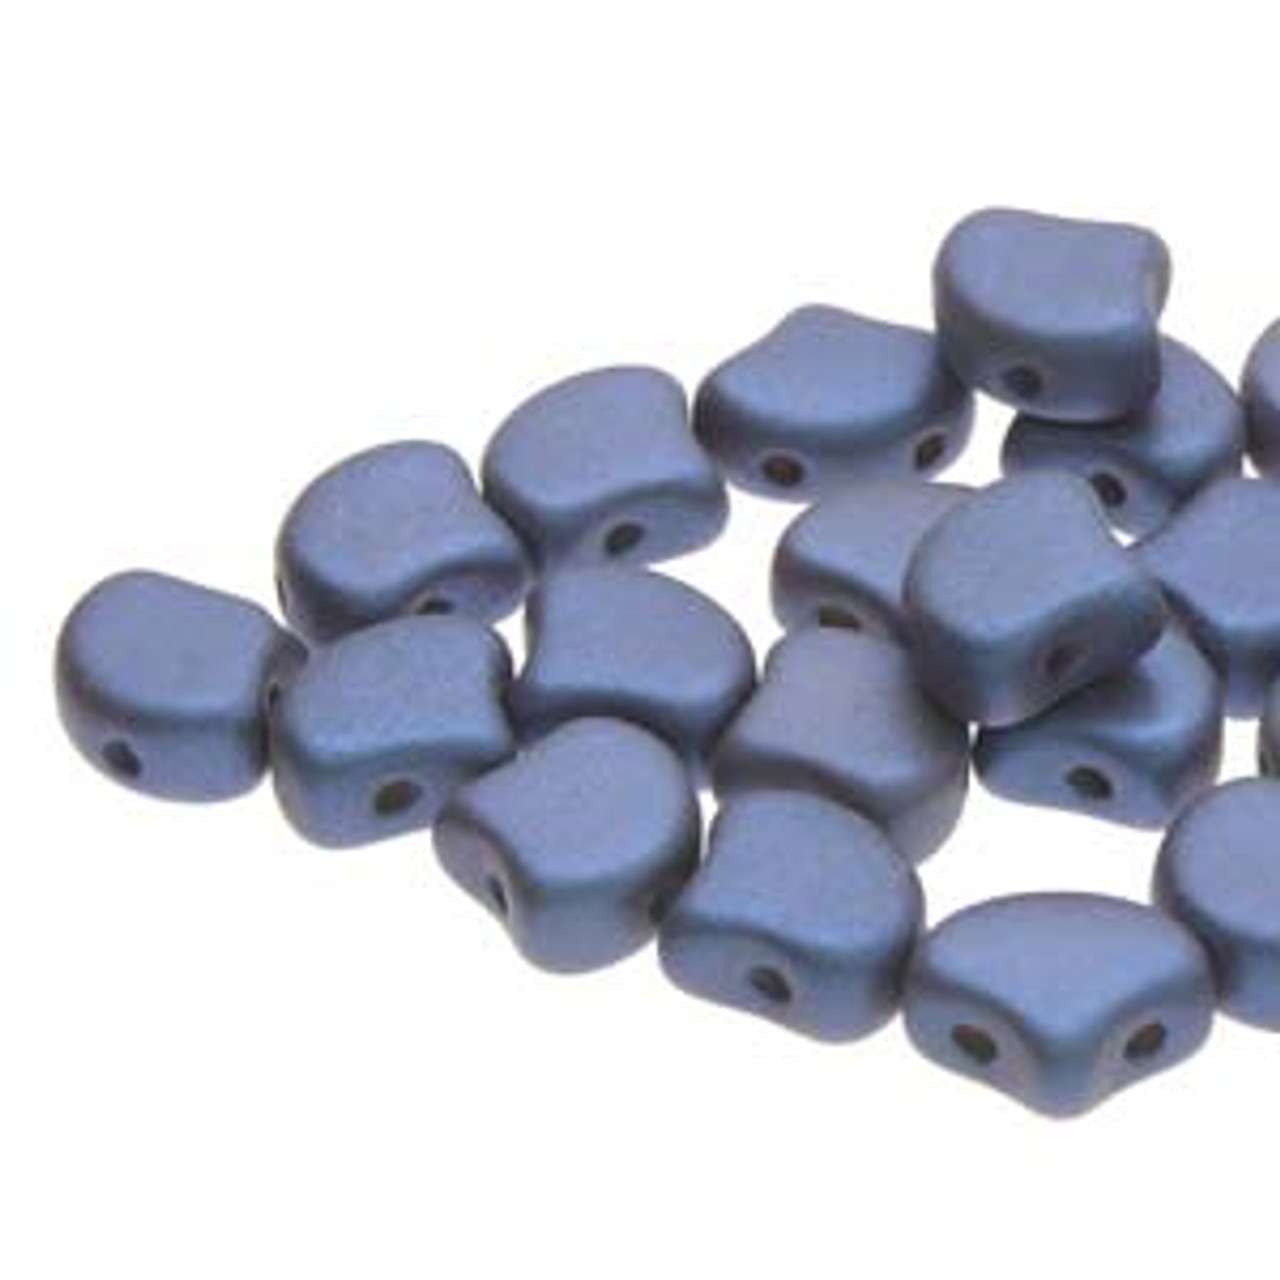 7.5x7.5mm Chatoyant Shimmer Blue Ginko Beads (8 Grams) Approximately 30-35 Beads